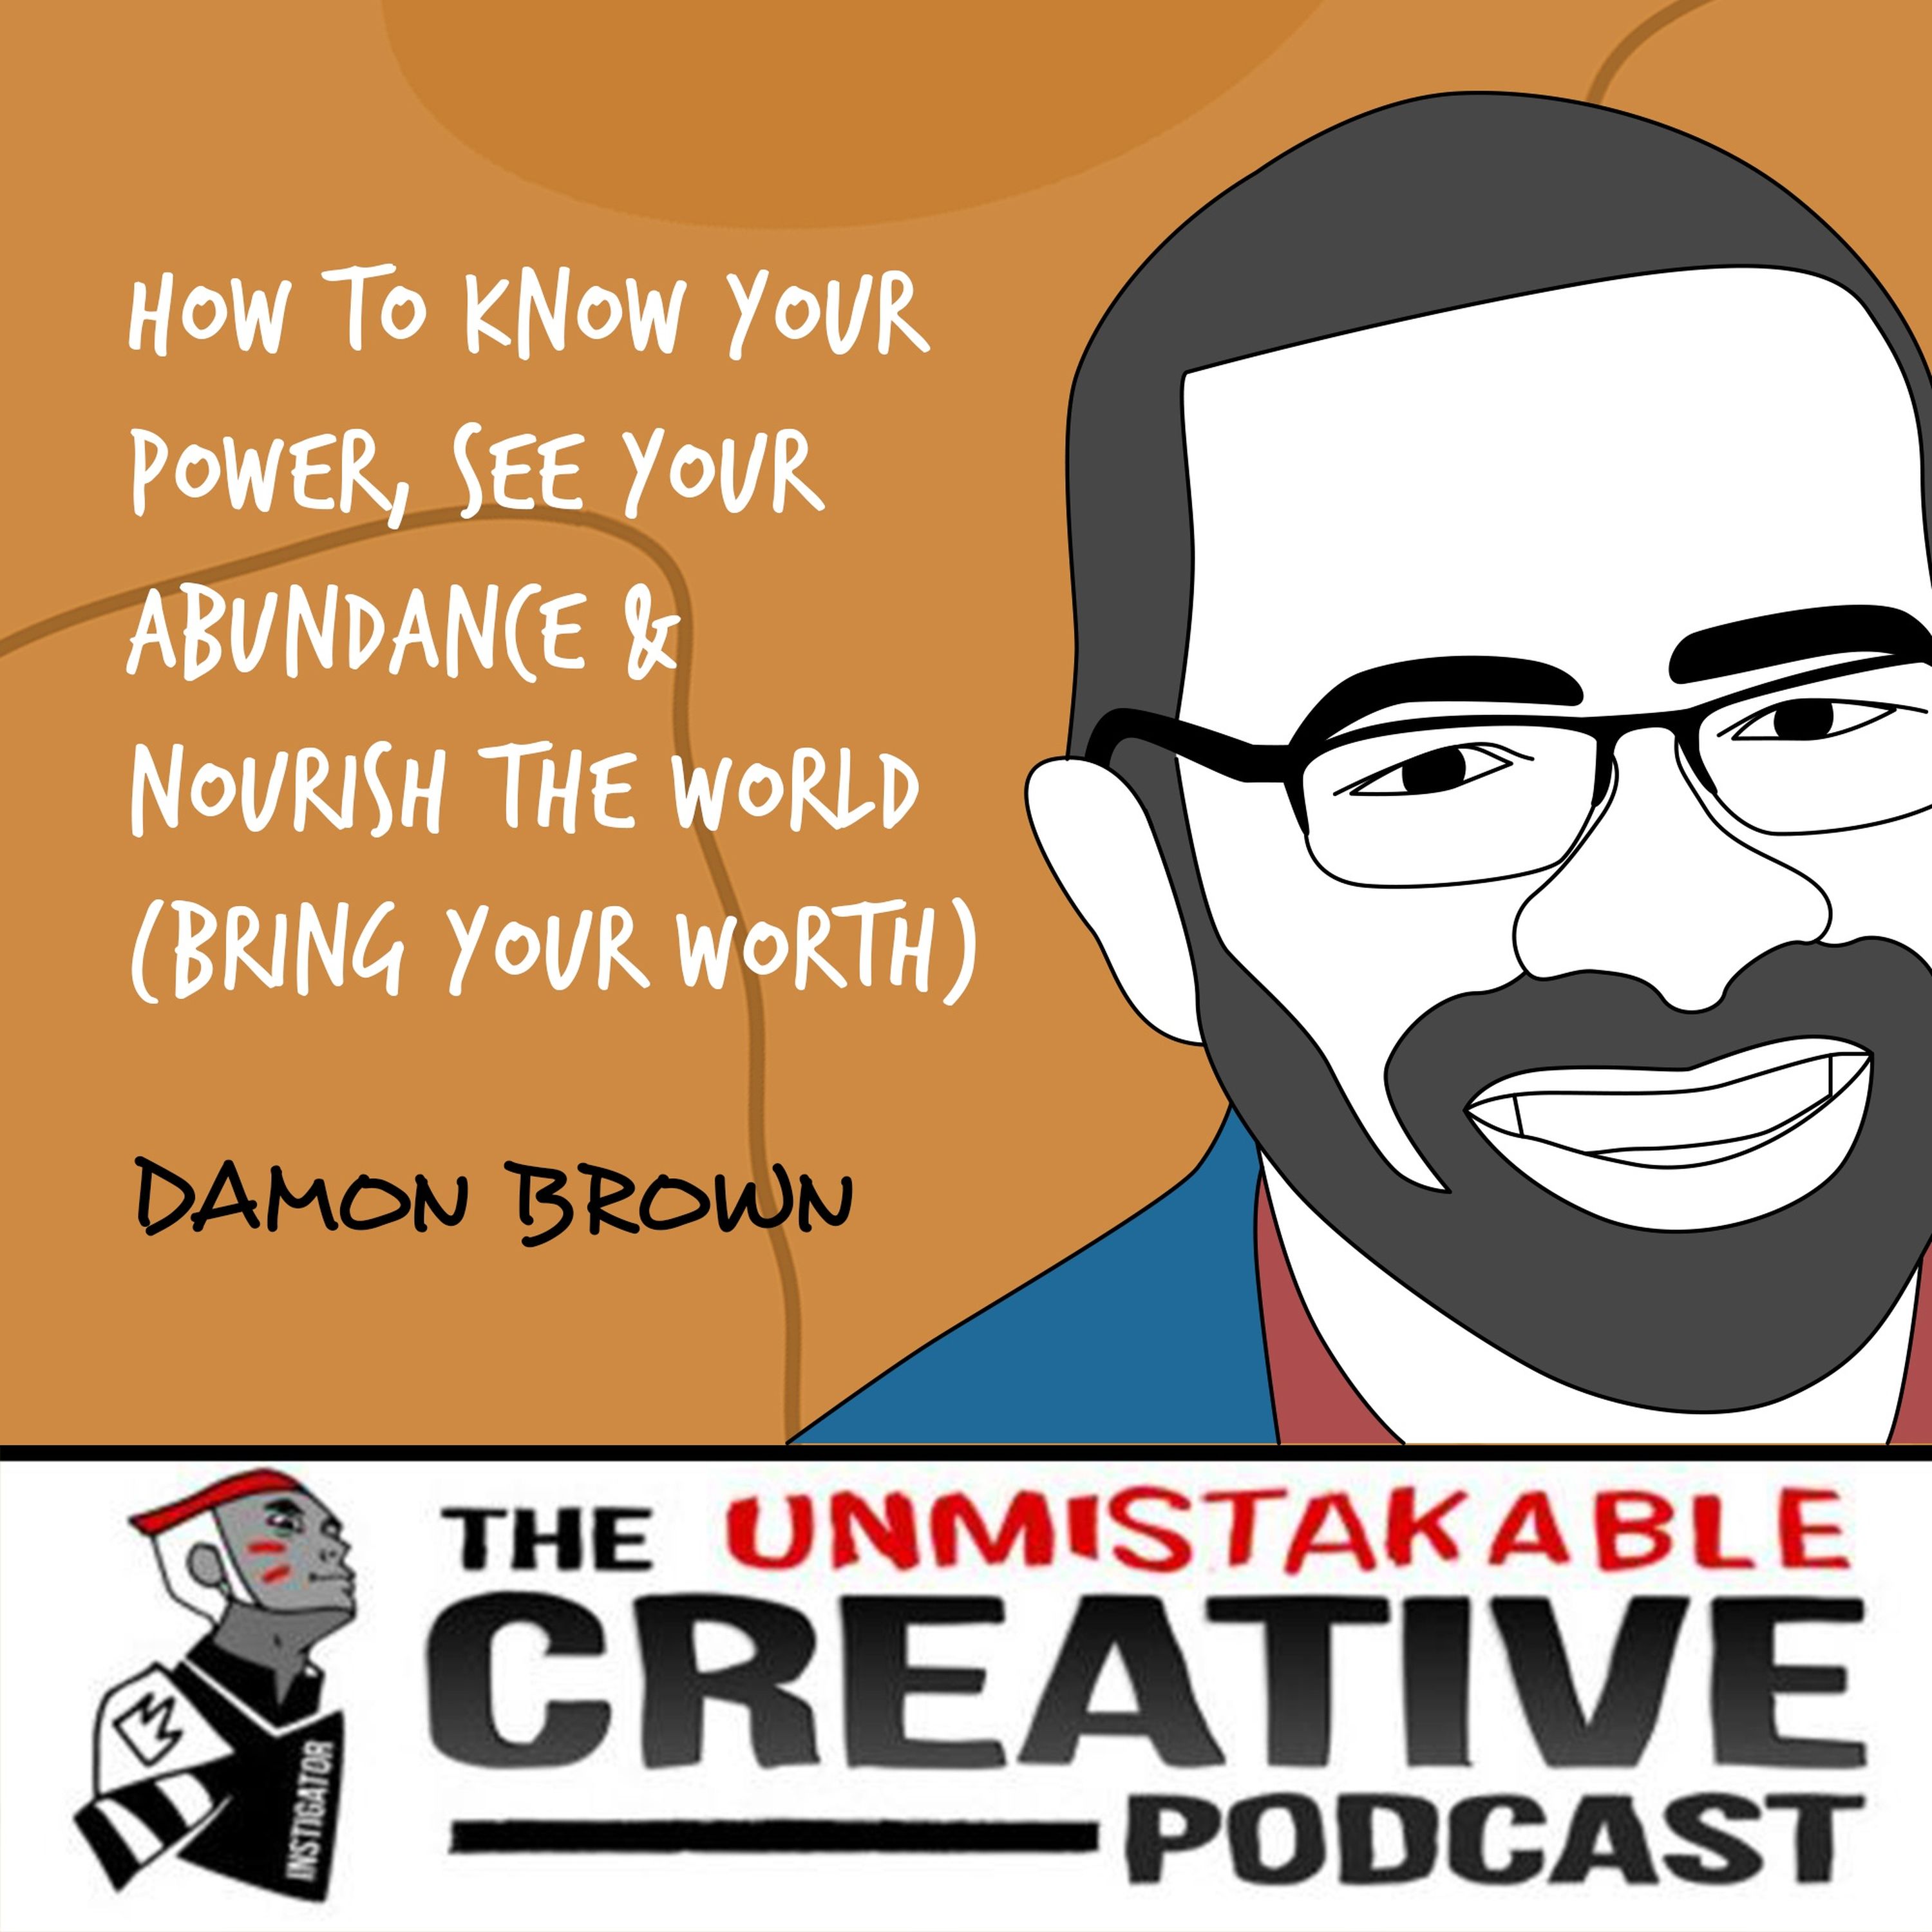 Damon Brown | How to Know Your Power, See Your Abundance & Nourish the World